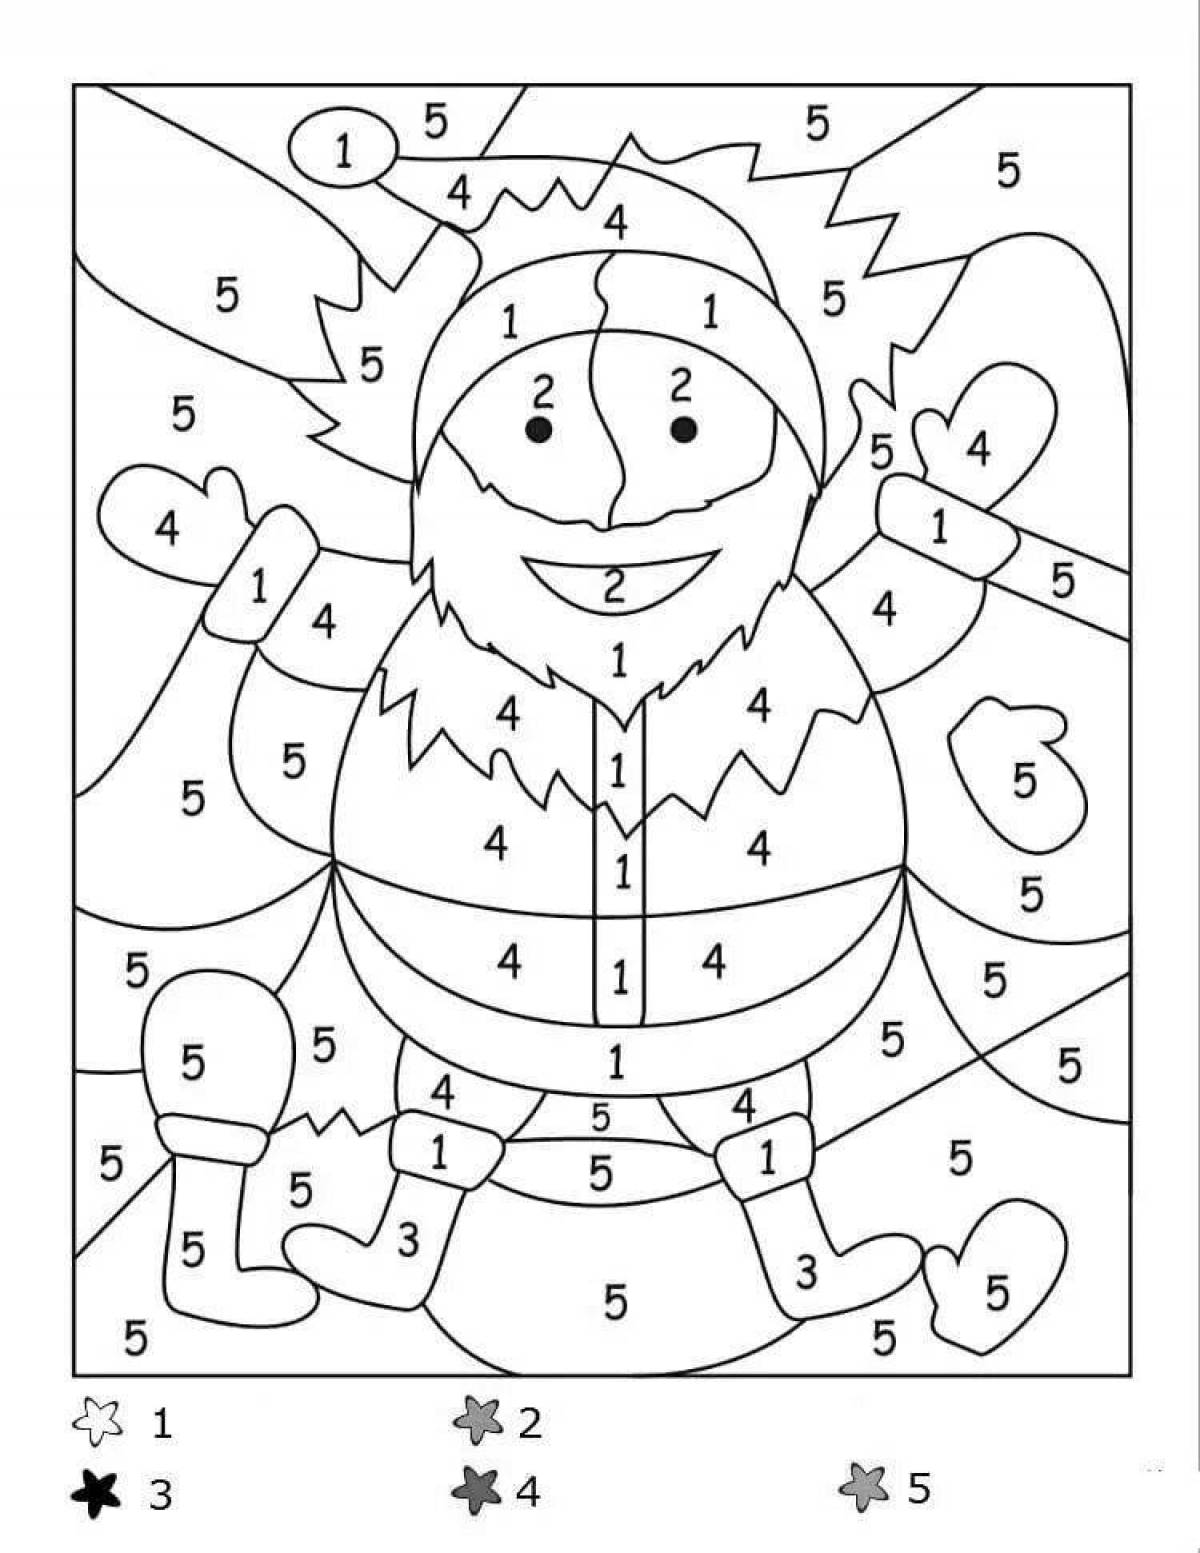 Bright coloring snowman by numbers